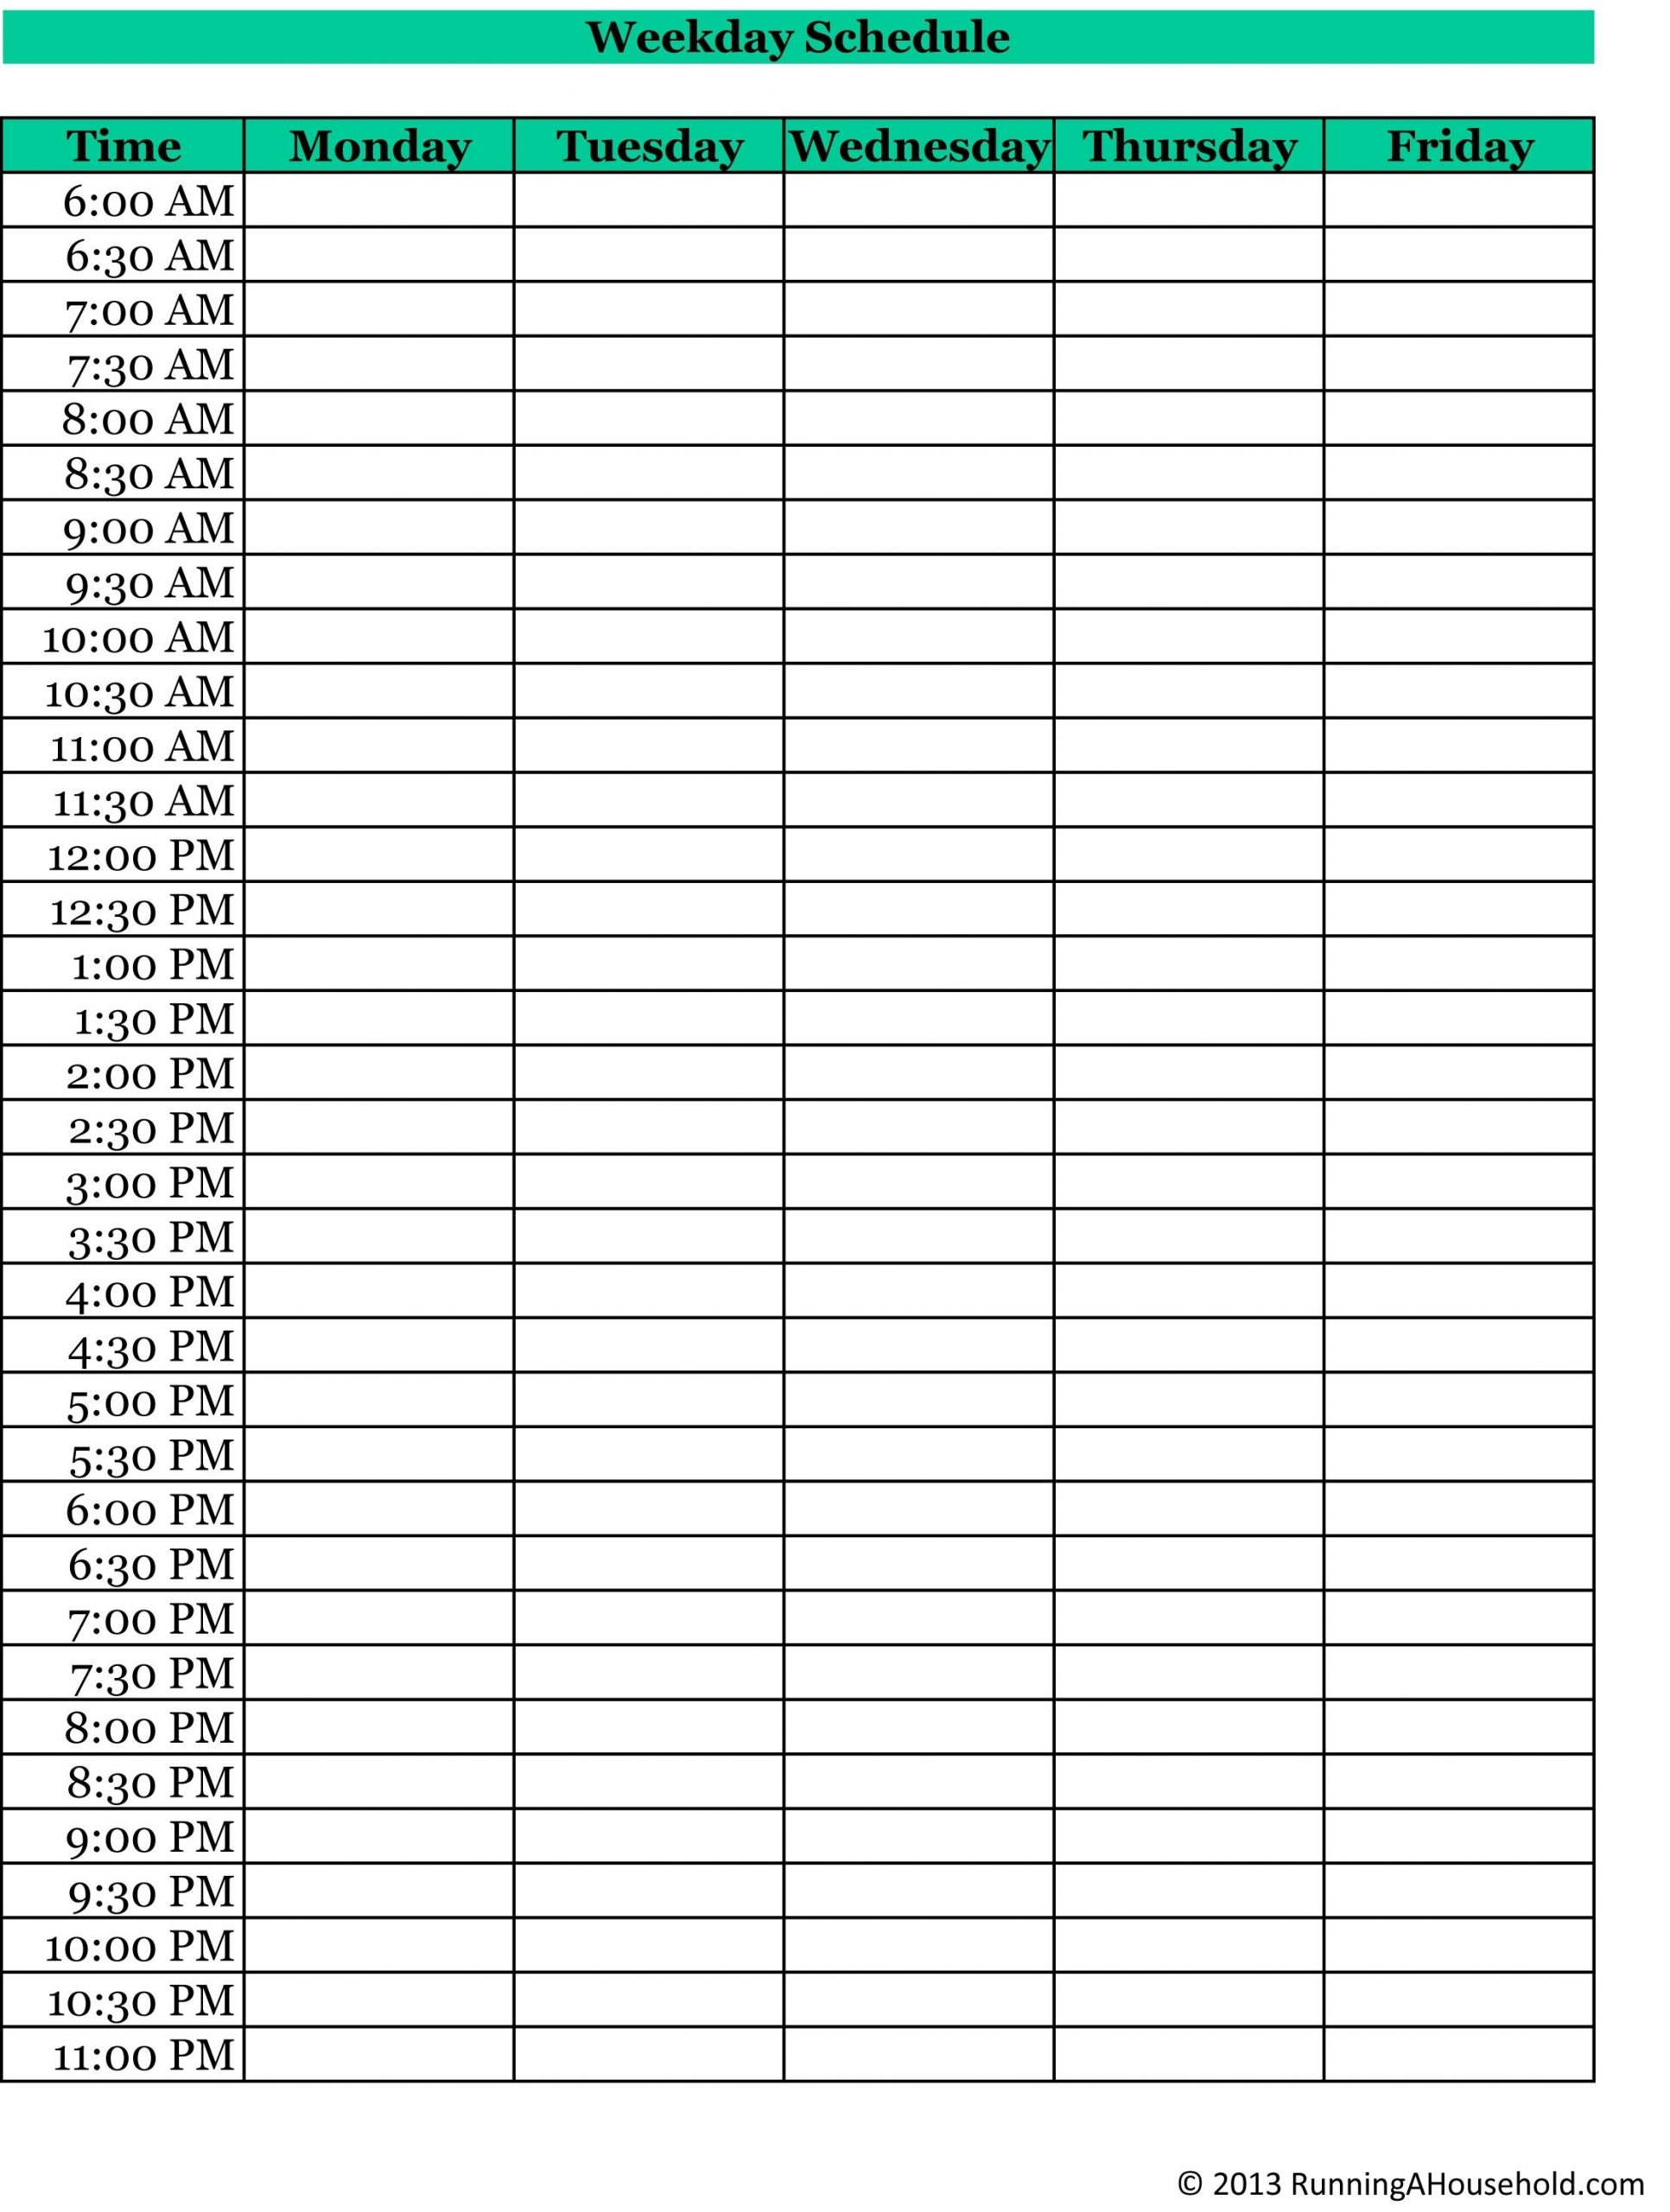 Printable Weekly Schedule With Hours Monday To Friday Time And Date Printable Calendar